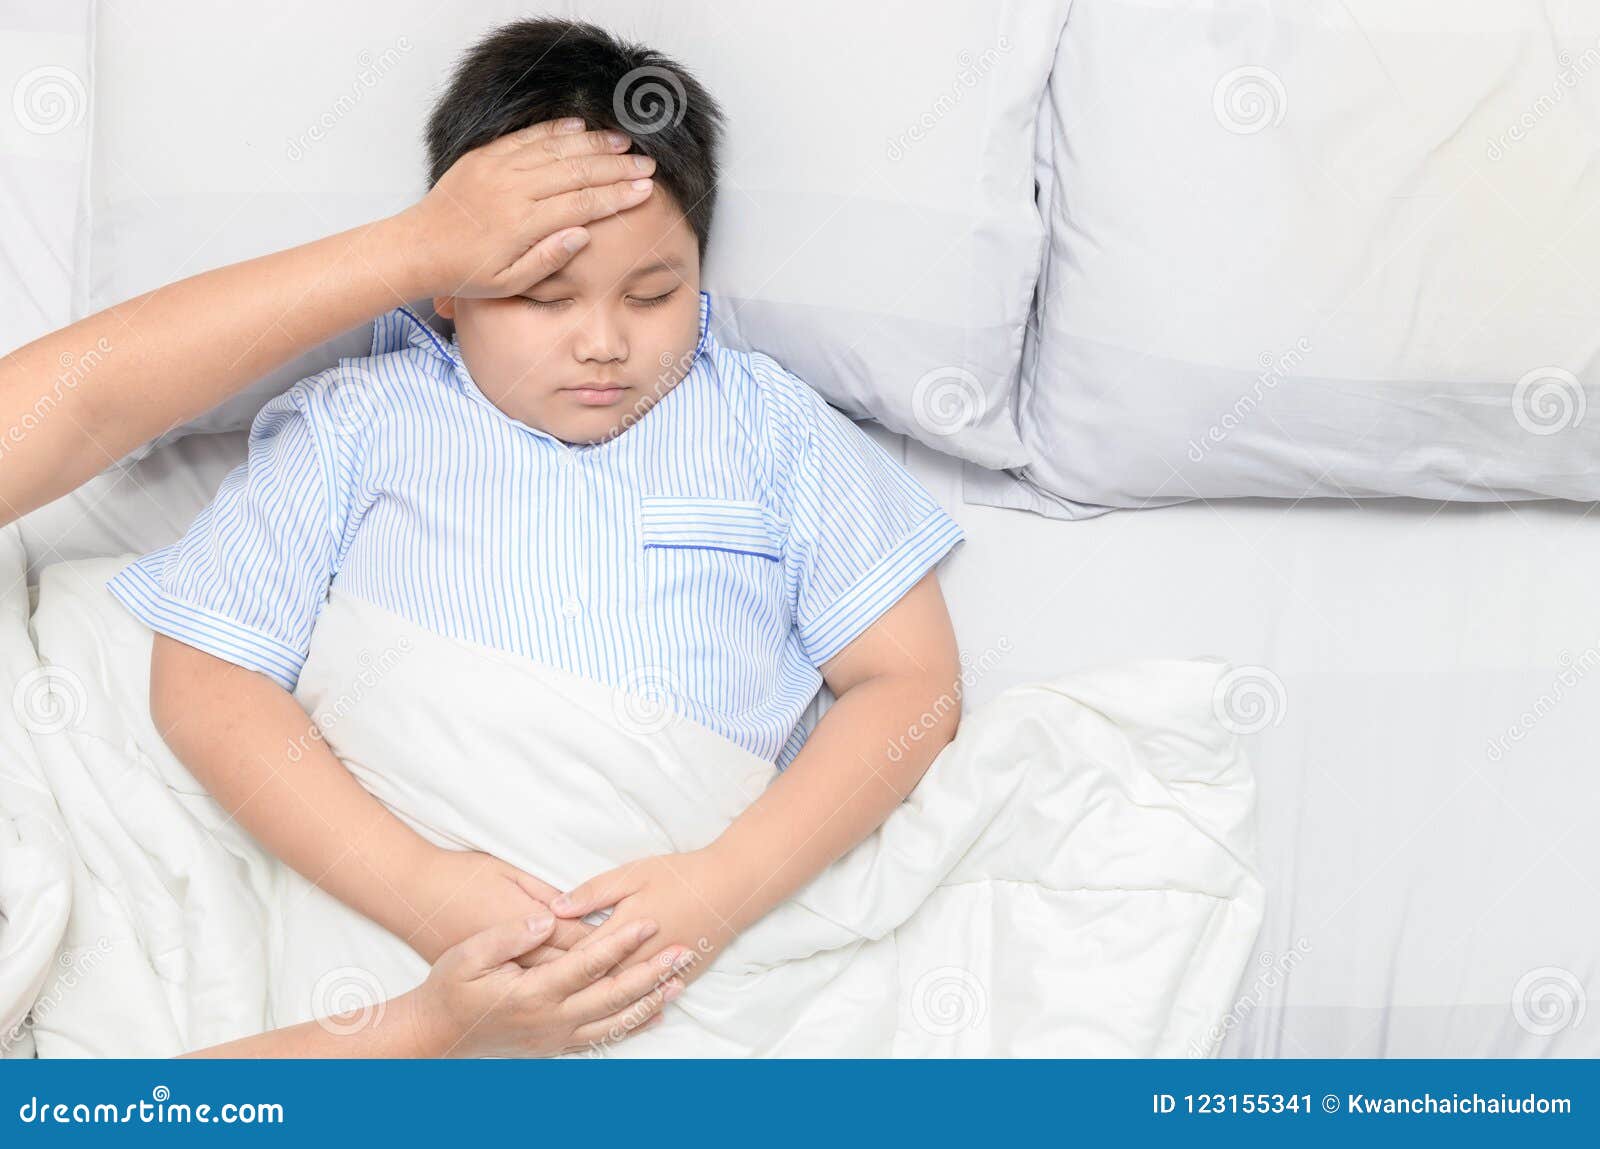 Sick Child With Fever And Illness In Bed, Stock Image ...